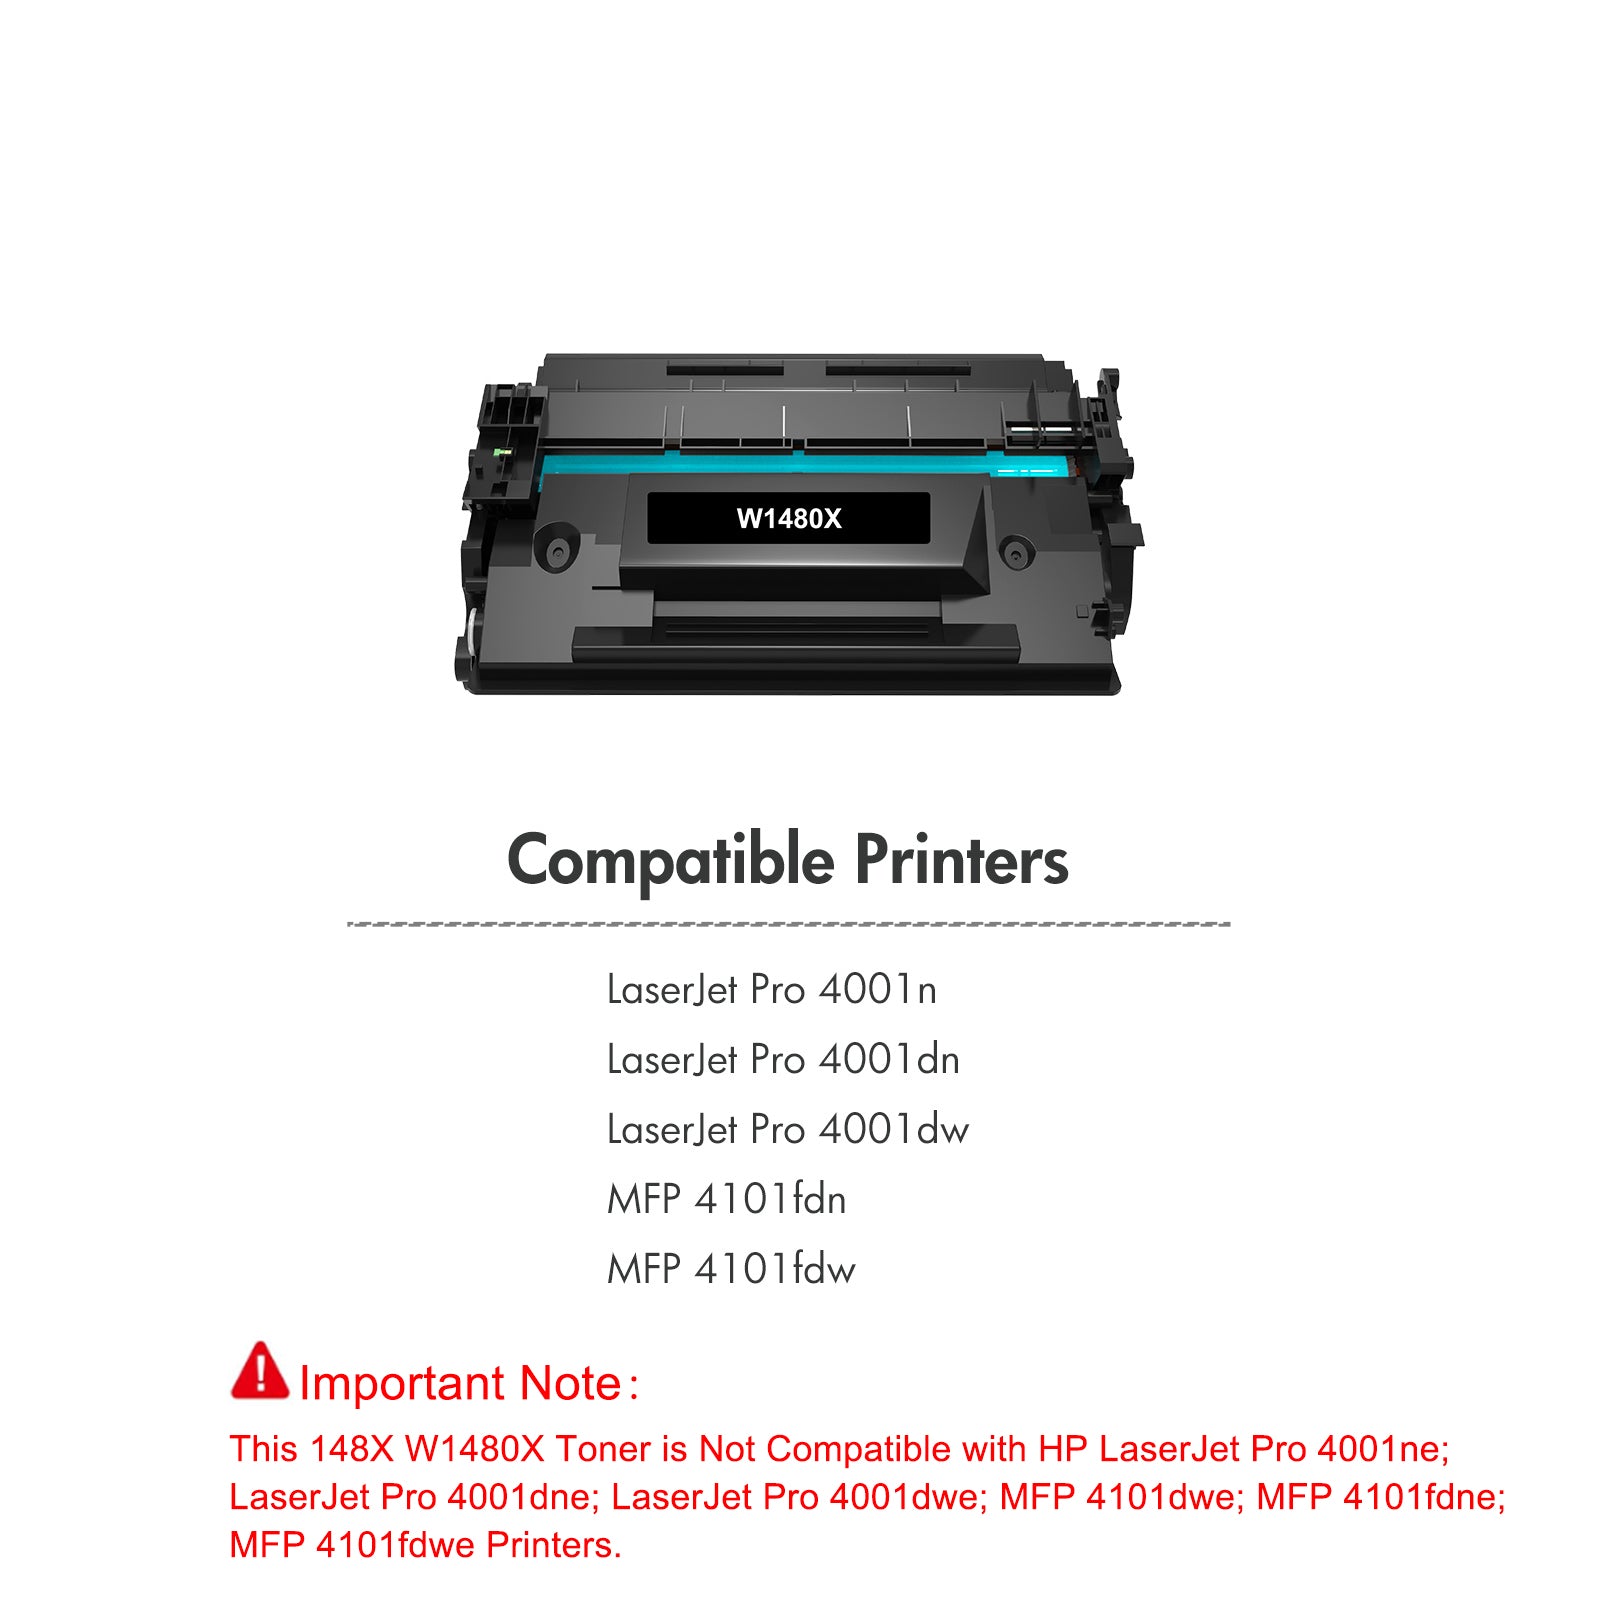 148X Toner Cartridge 148A High Yield Compatible for HP W1480X 148X 148A Laserjet Pro 4001dn MFP 4101fdw 4101fdn 4001n 4001dn 4001dw (2-Pack)